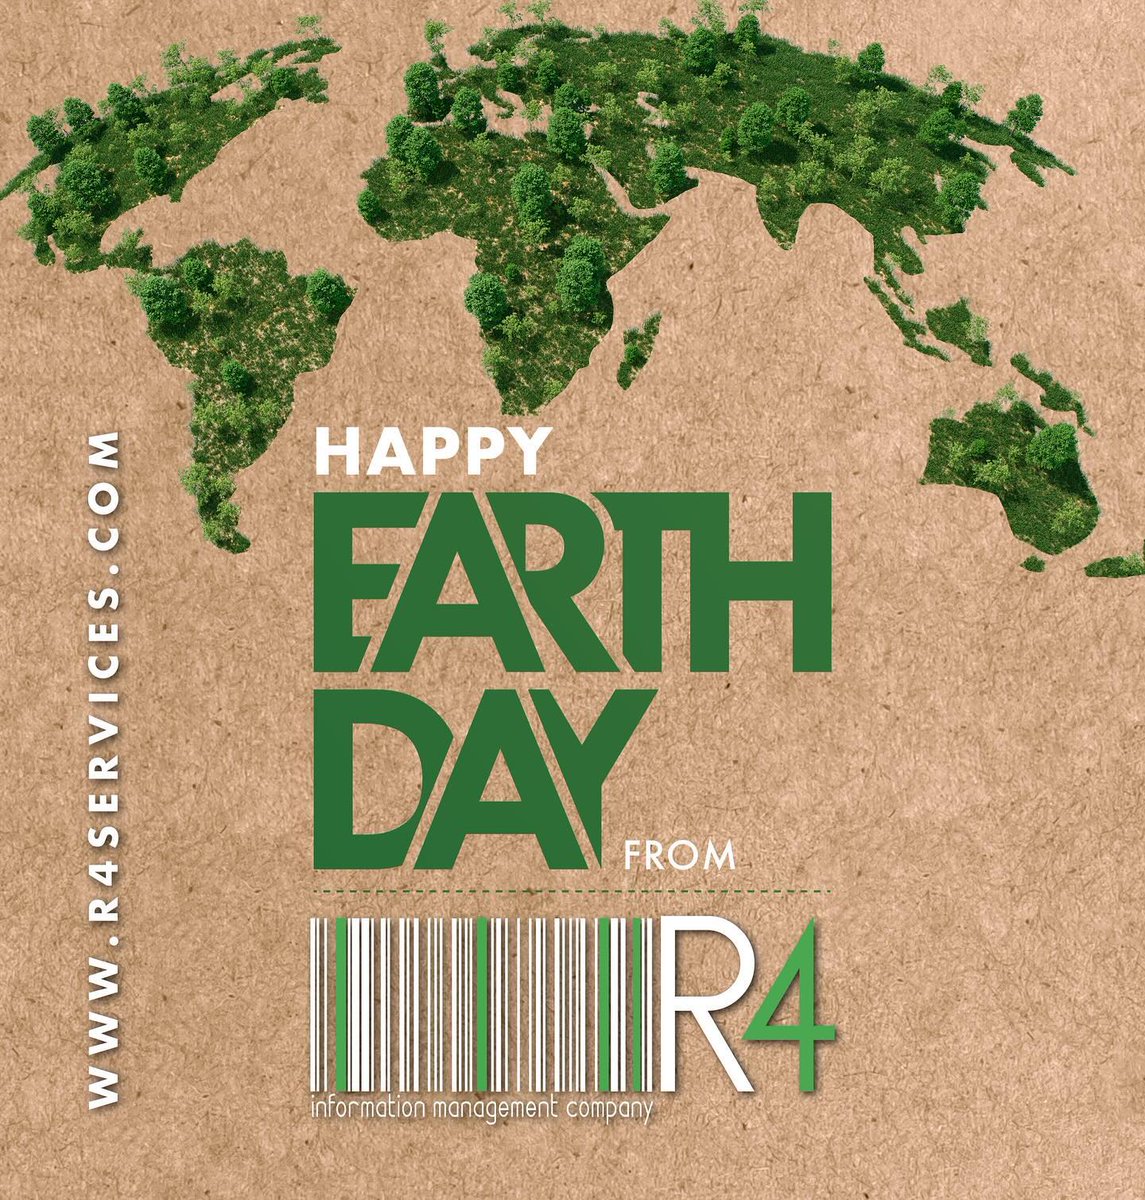 Every day is Earth Day at R4 services! 🌳✳️🌎🍃♻️💦❇️ This year alone R4 has securely shredded, recycled, and saved: ✅ trees ✅ water ✅ gas ✅ carbon #R4services #Earth Day #reducereuserecycle